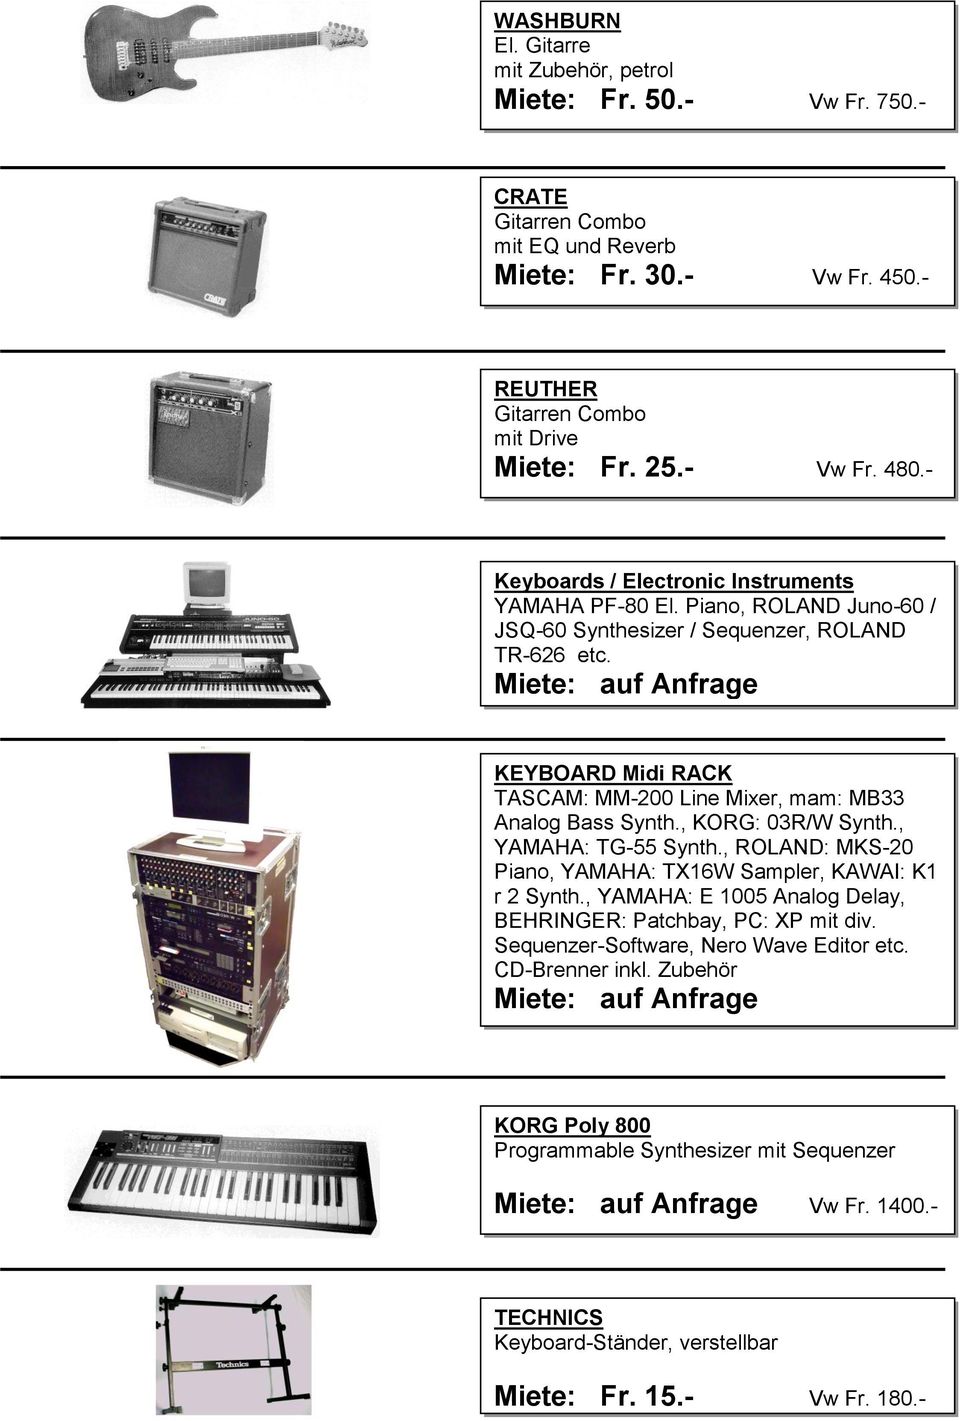 Miete: auf Anfrage KEYBOARD Midi RACK TASCAM: MM-200 Line Mixer, mam: MB33 Analog Bass Synth., KORG: 03R/W Synth., YAMAHA: TG-55 Synth.